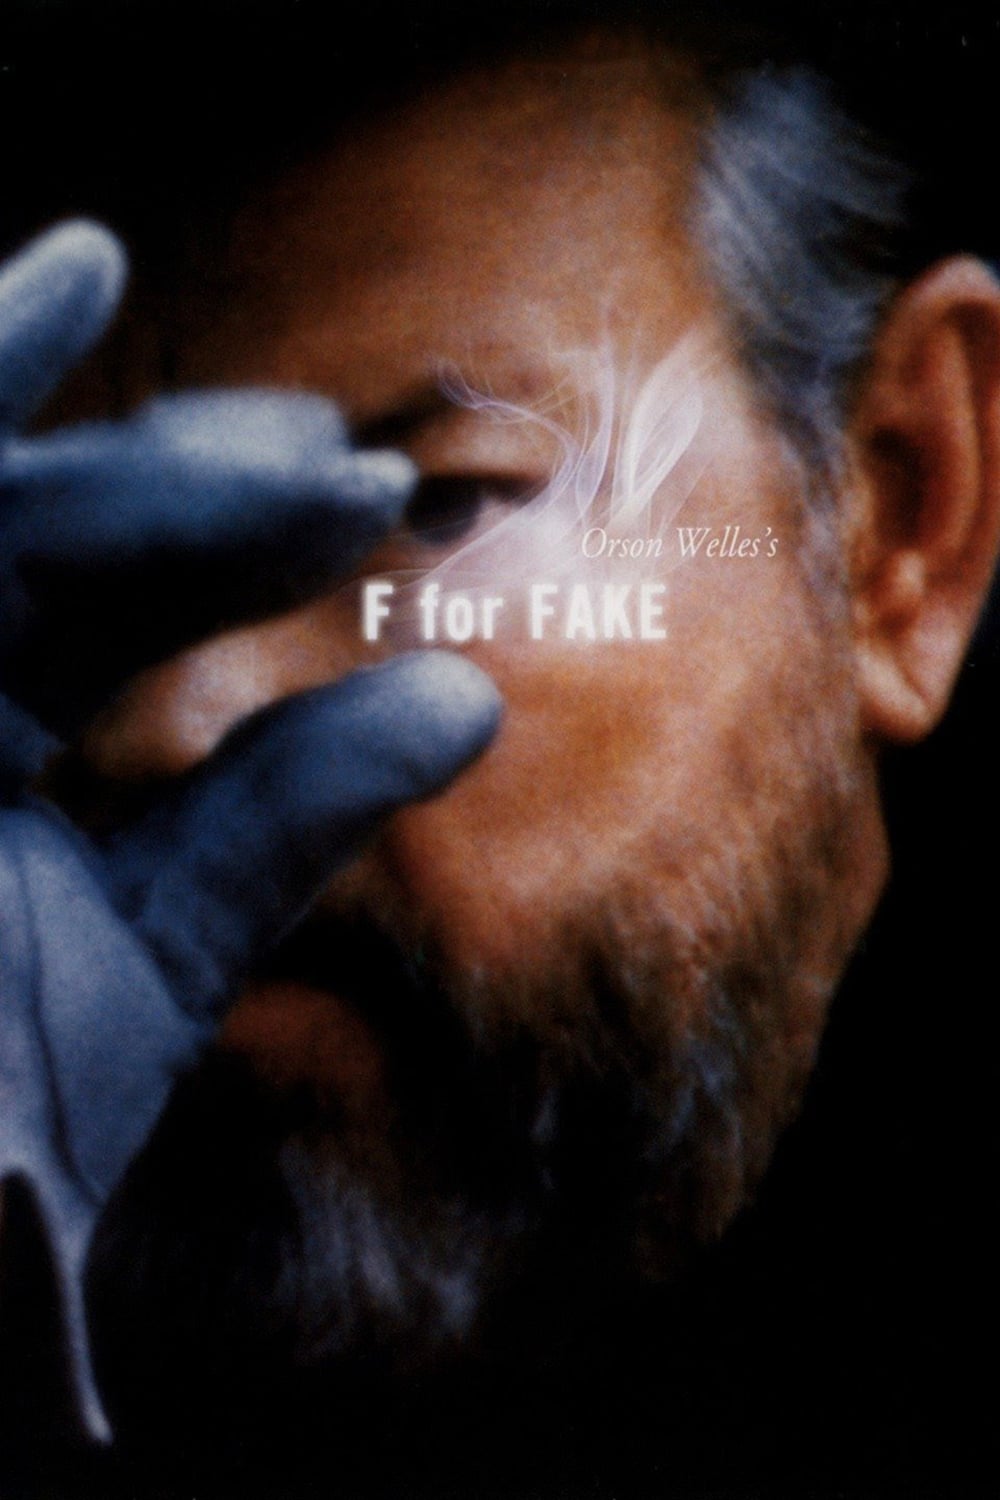 F for fake